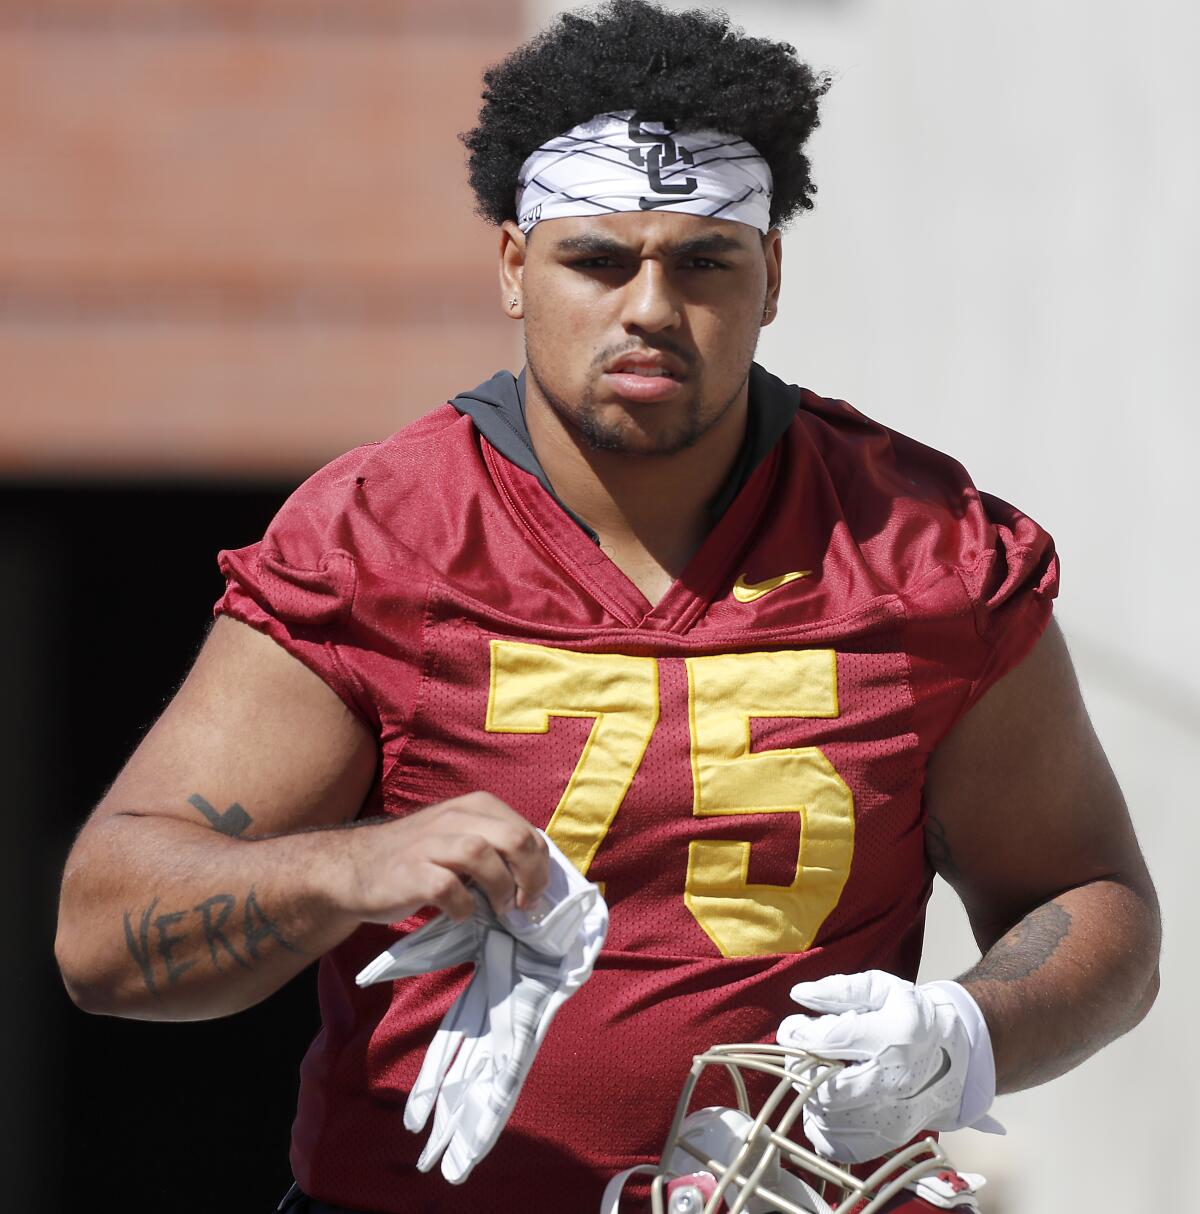 USC offensive lineman Alijah Vera-Tucker heads to the practice field during training camp last August.